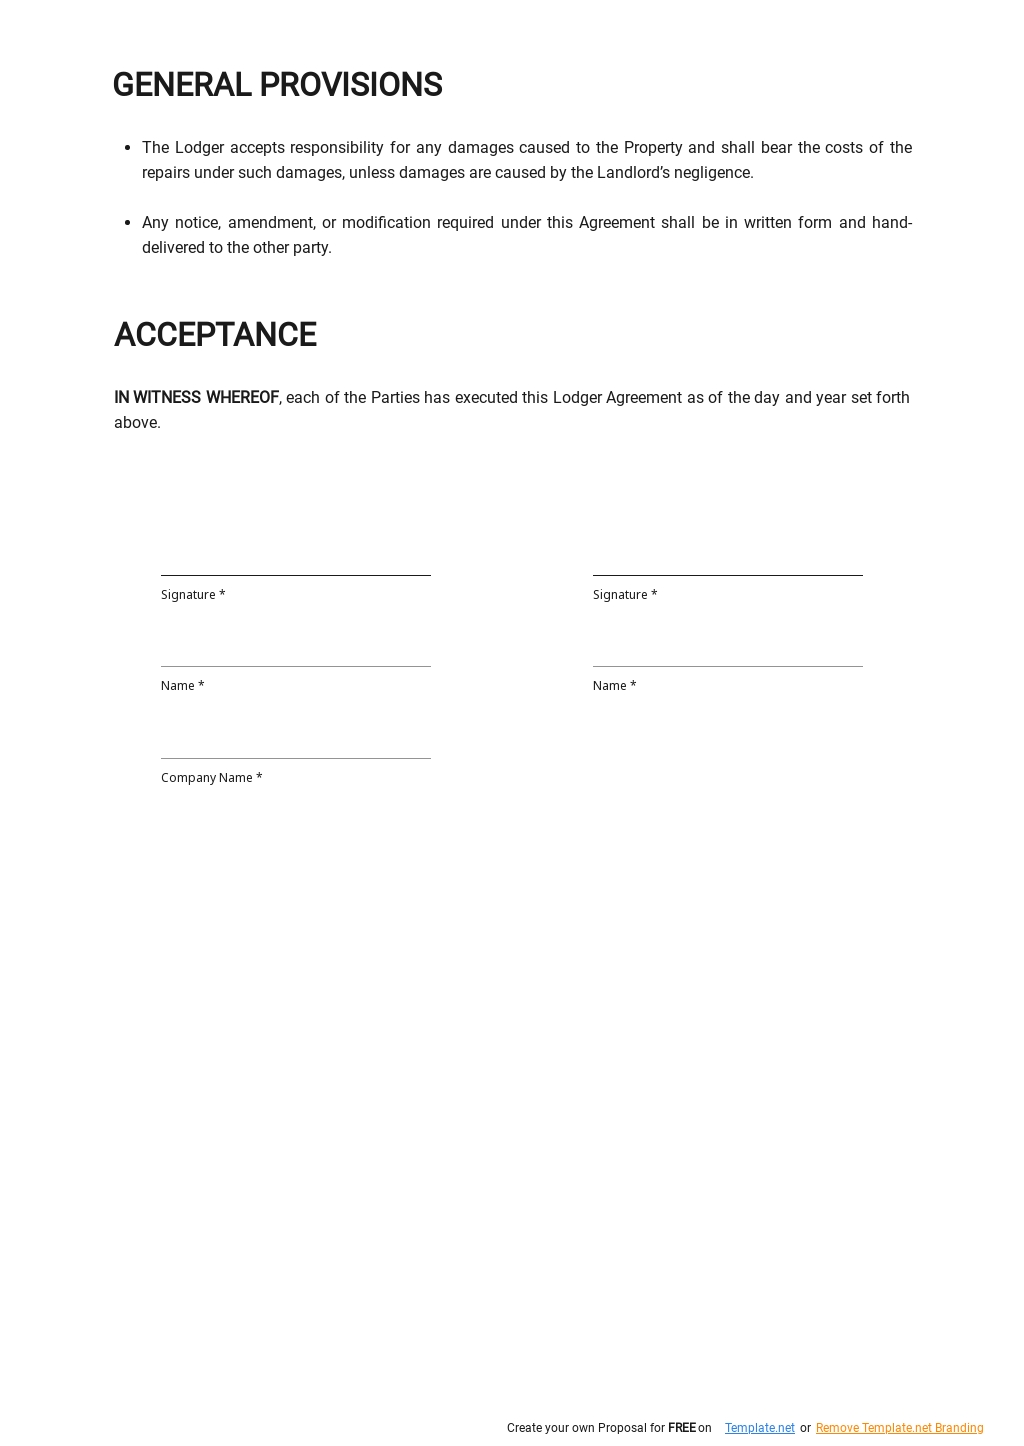 Free Basic Lodger Agreement Template - Google Docs, Word Inside notice to terminate a lodger agreement template